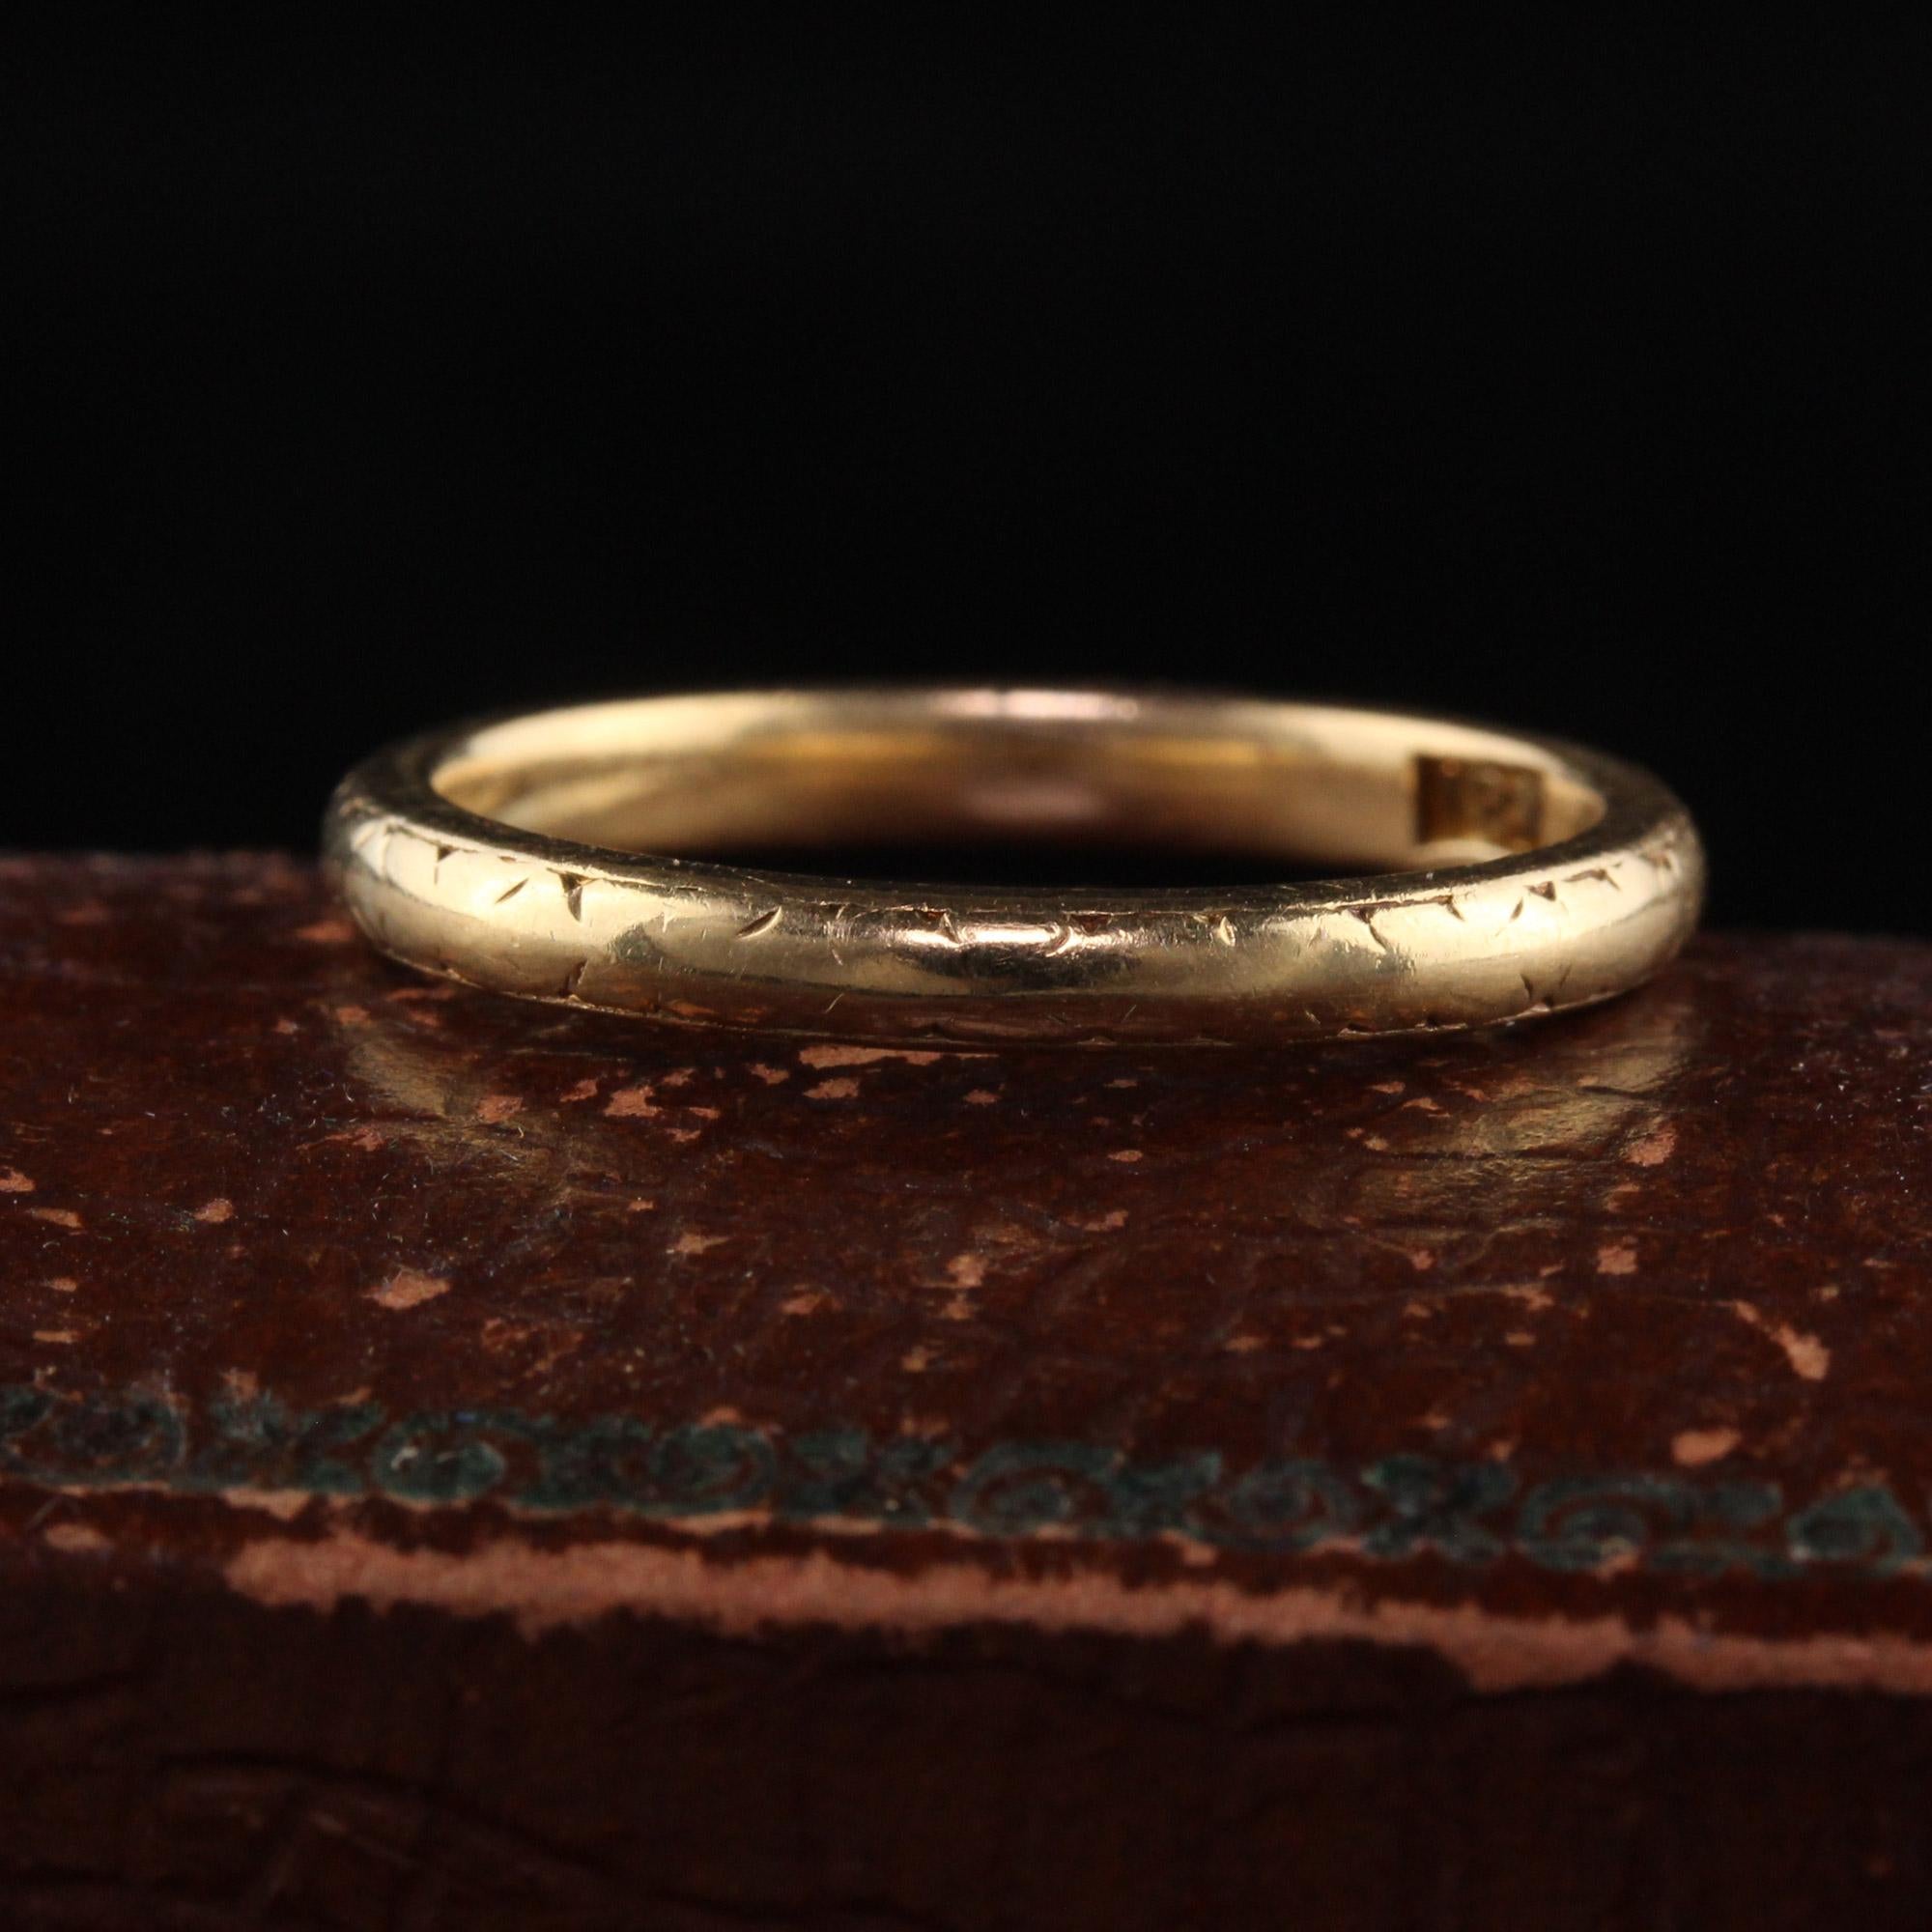 Beautiful Antique Art Deco 18K Yellow Gold Engraved Wedding Band. This gorgeous wedding band is crafted in 18k yellow gold. It has faint engravings going around the entire ring and it is in good condition.

Item #R1388

Metal: 18K Yellow